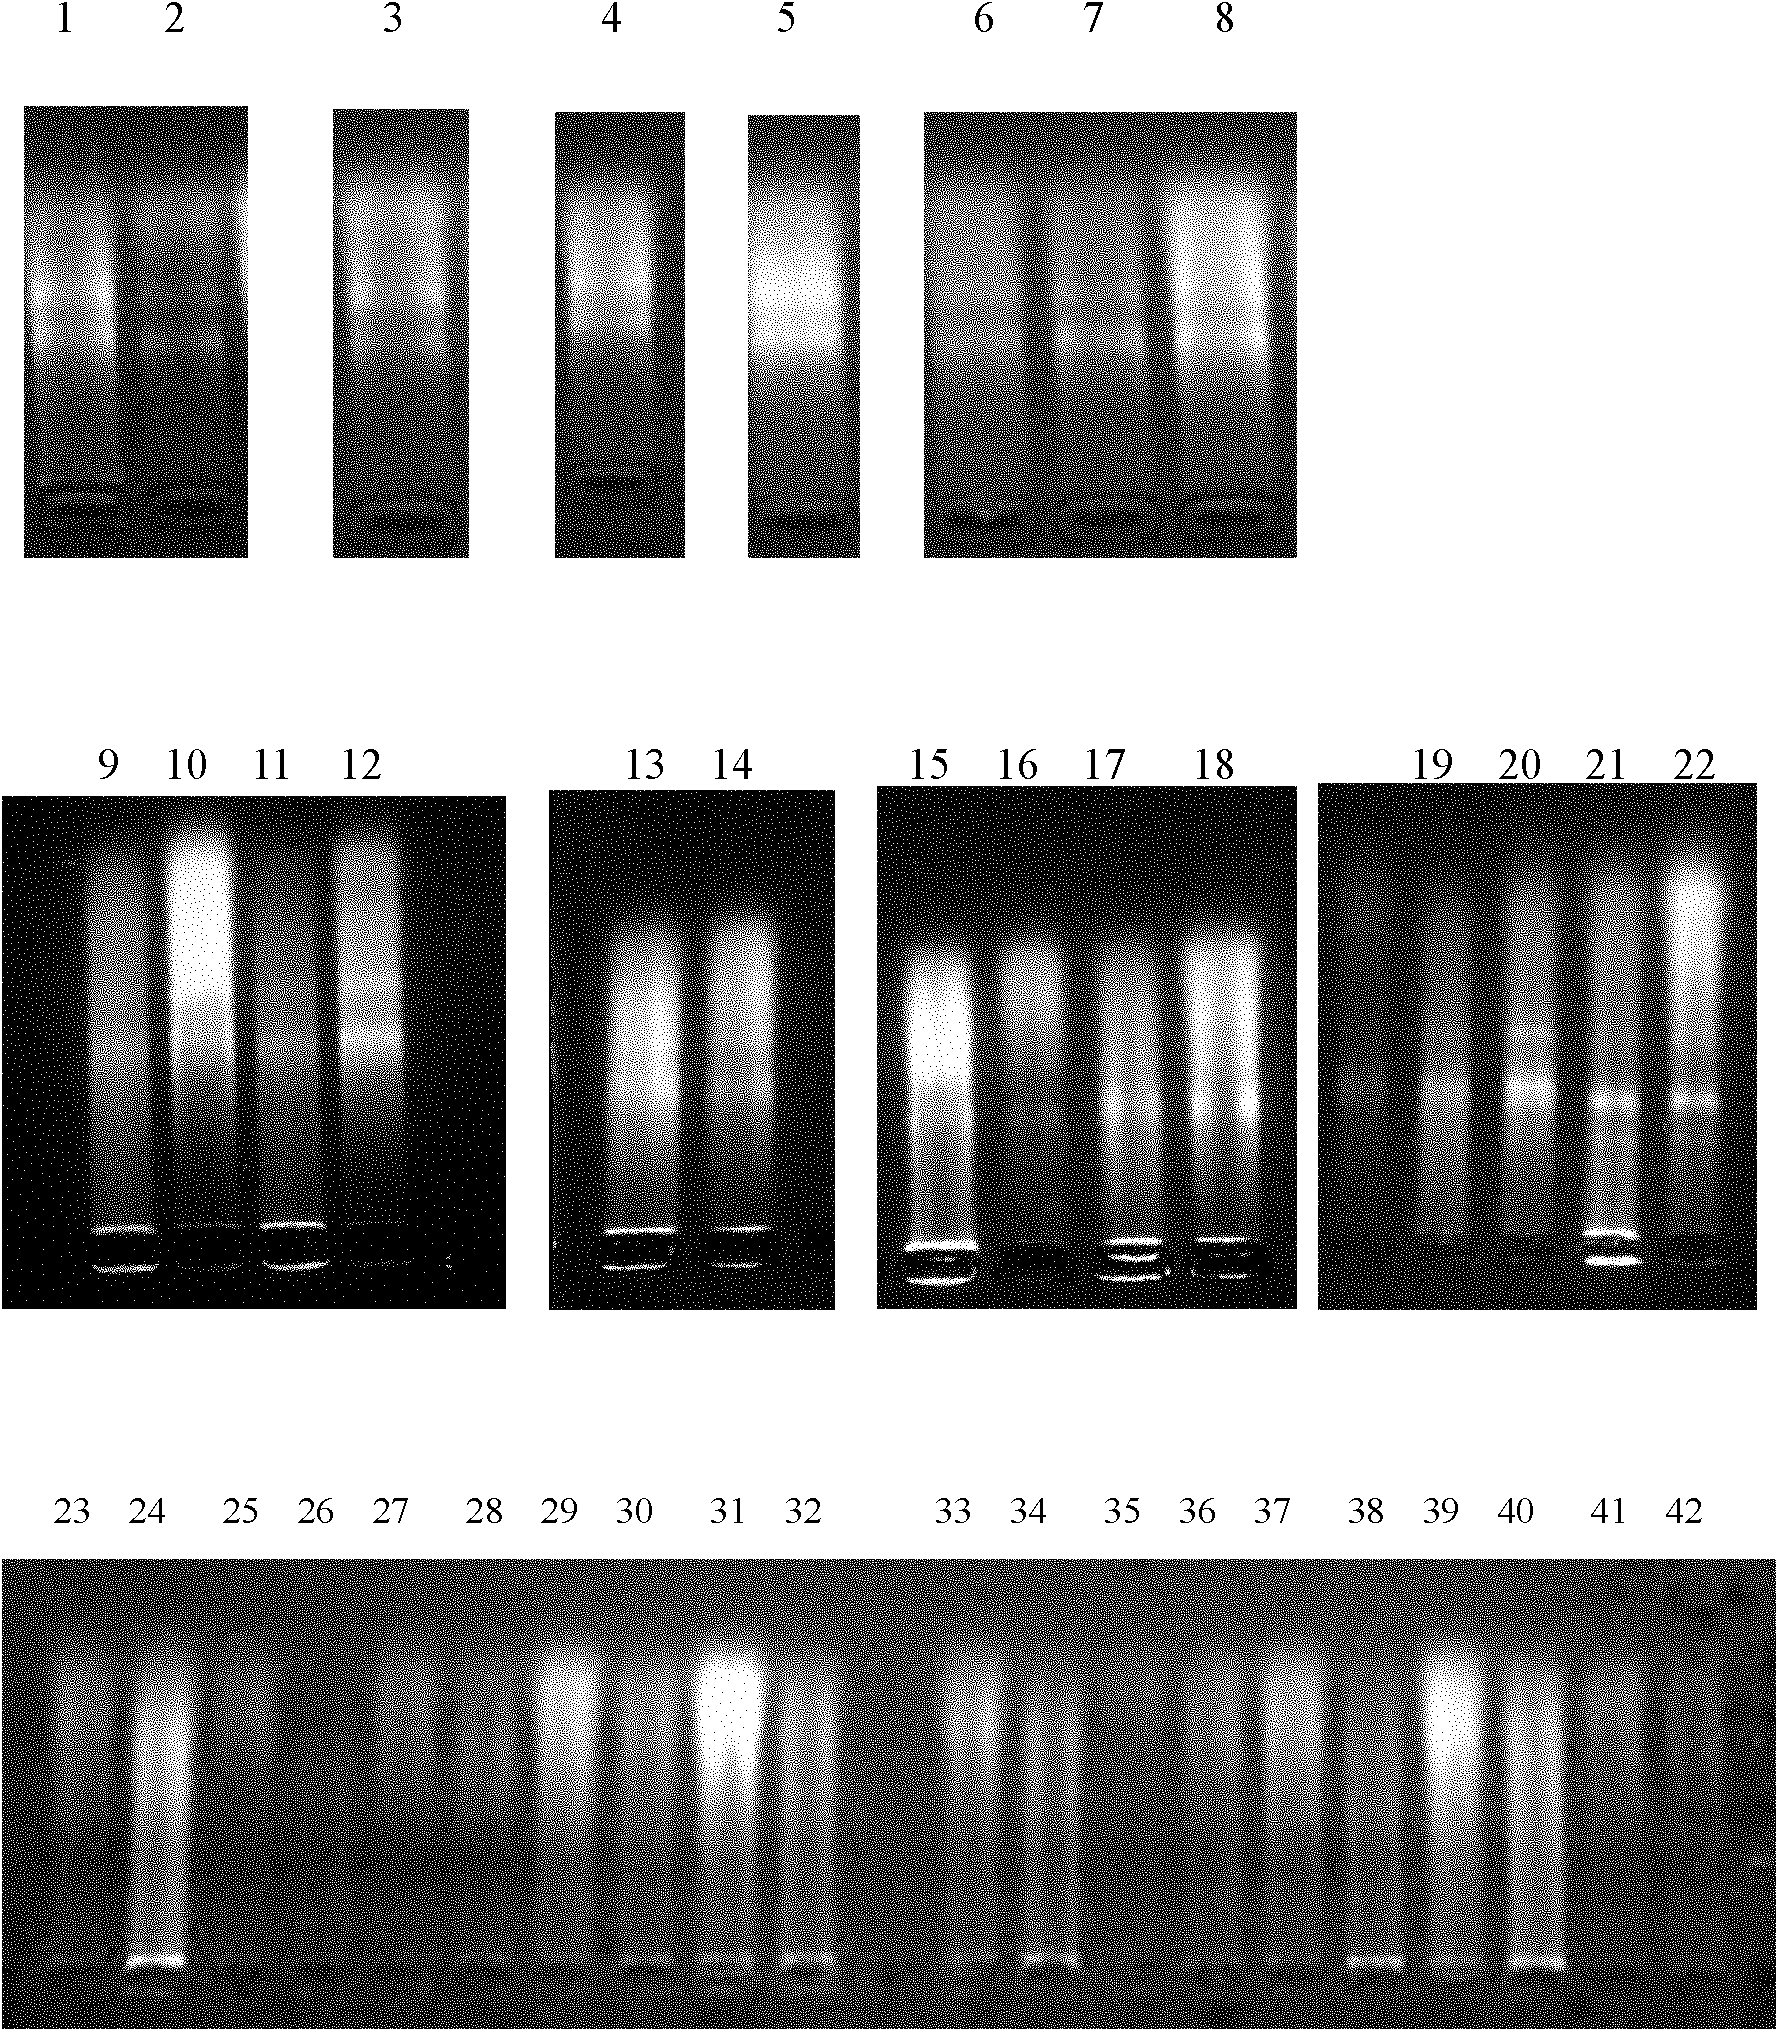 Method for extracting total ribonucleic acid (RNA) from paraffin-embedded tissues